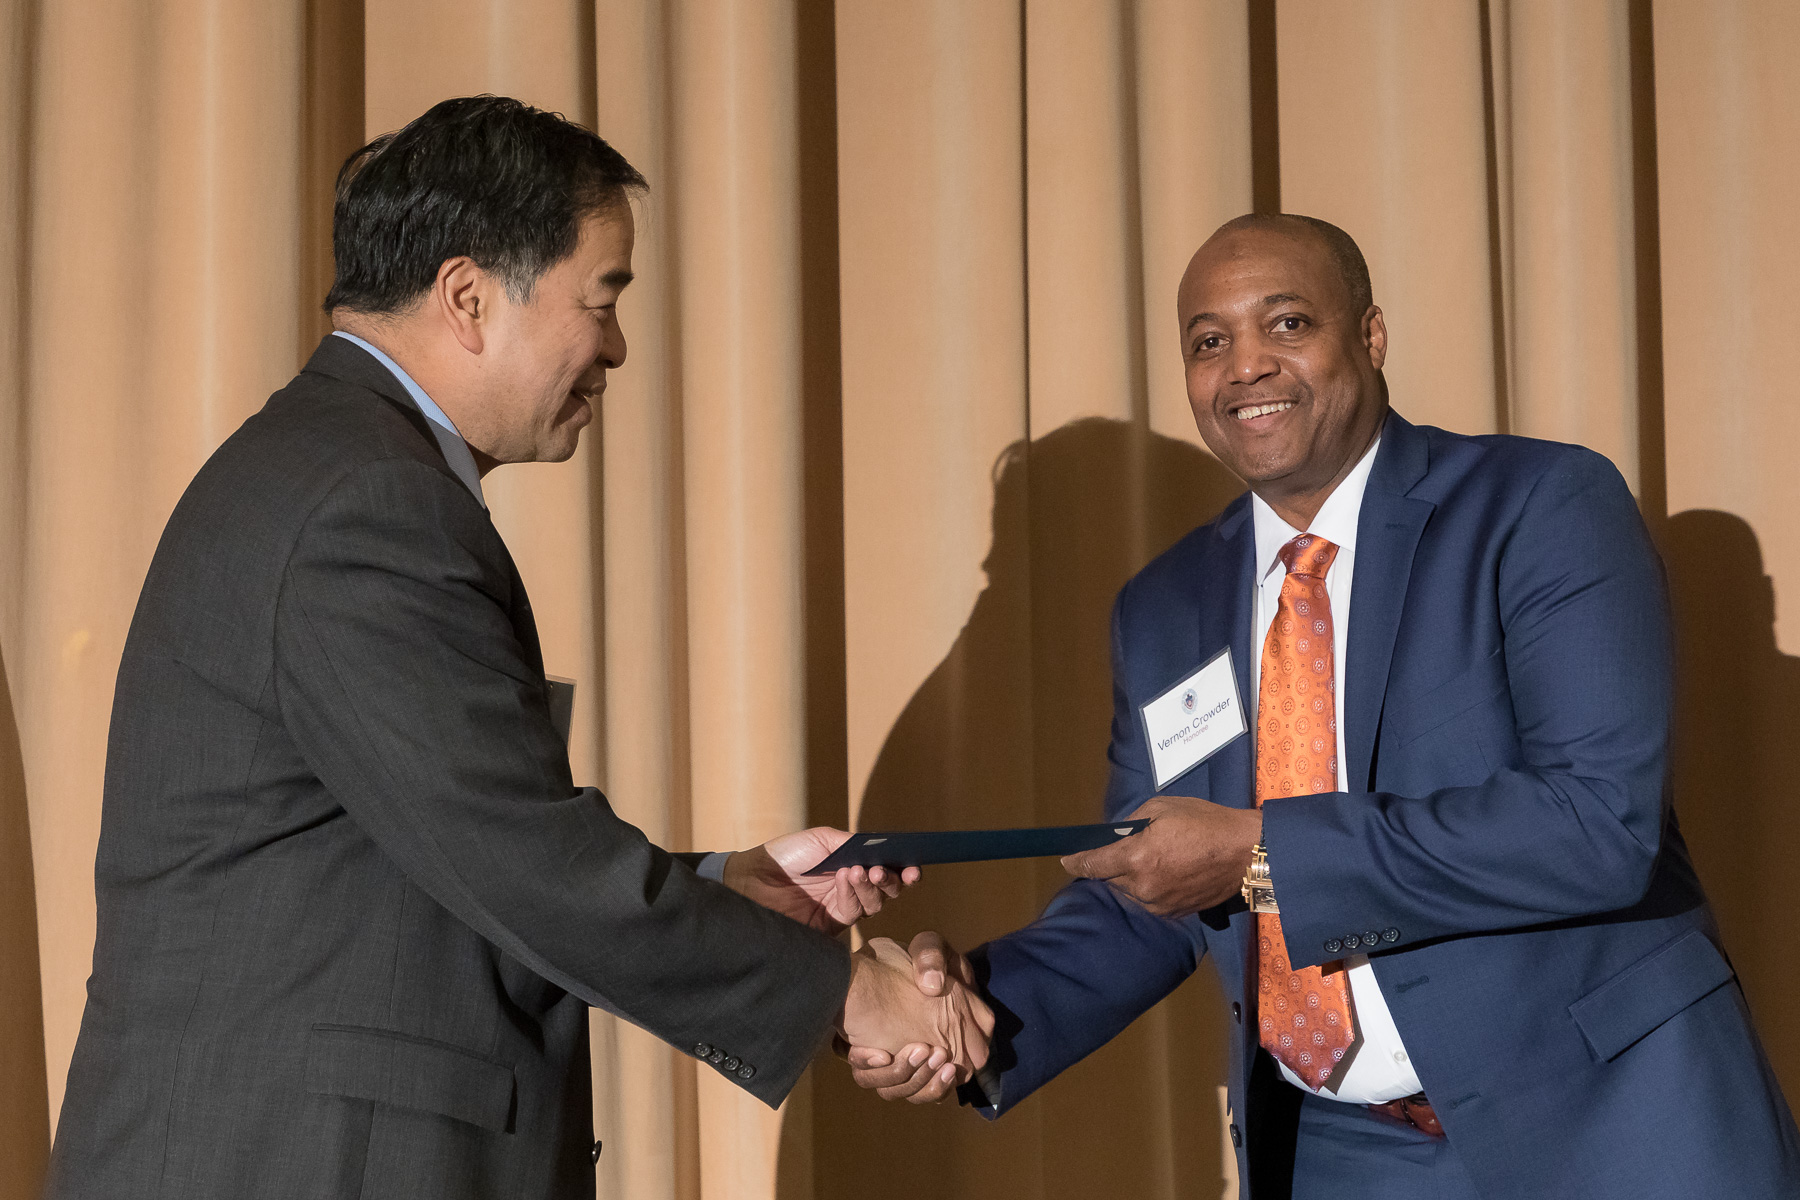 Vernon Crowder, right, with A. Gabriel Esteban, Ph.D., president, as faculty and staff members are inducted into DePaul University's 25 Year Club, Tuesday, Nov. 13, 2018, at the Lincoln Park Student Center. Employees celebrating their 25th work anniversary were honored at the luncheon with their colleagues and will have their names added to plaques located on the Loop and Lincoln Park Campuses. (DePaul University/Jeff Carrion)